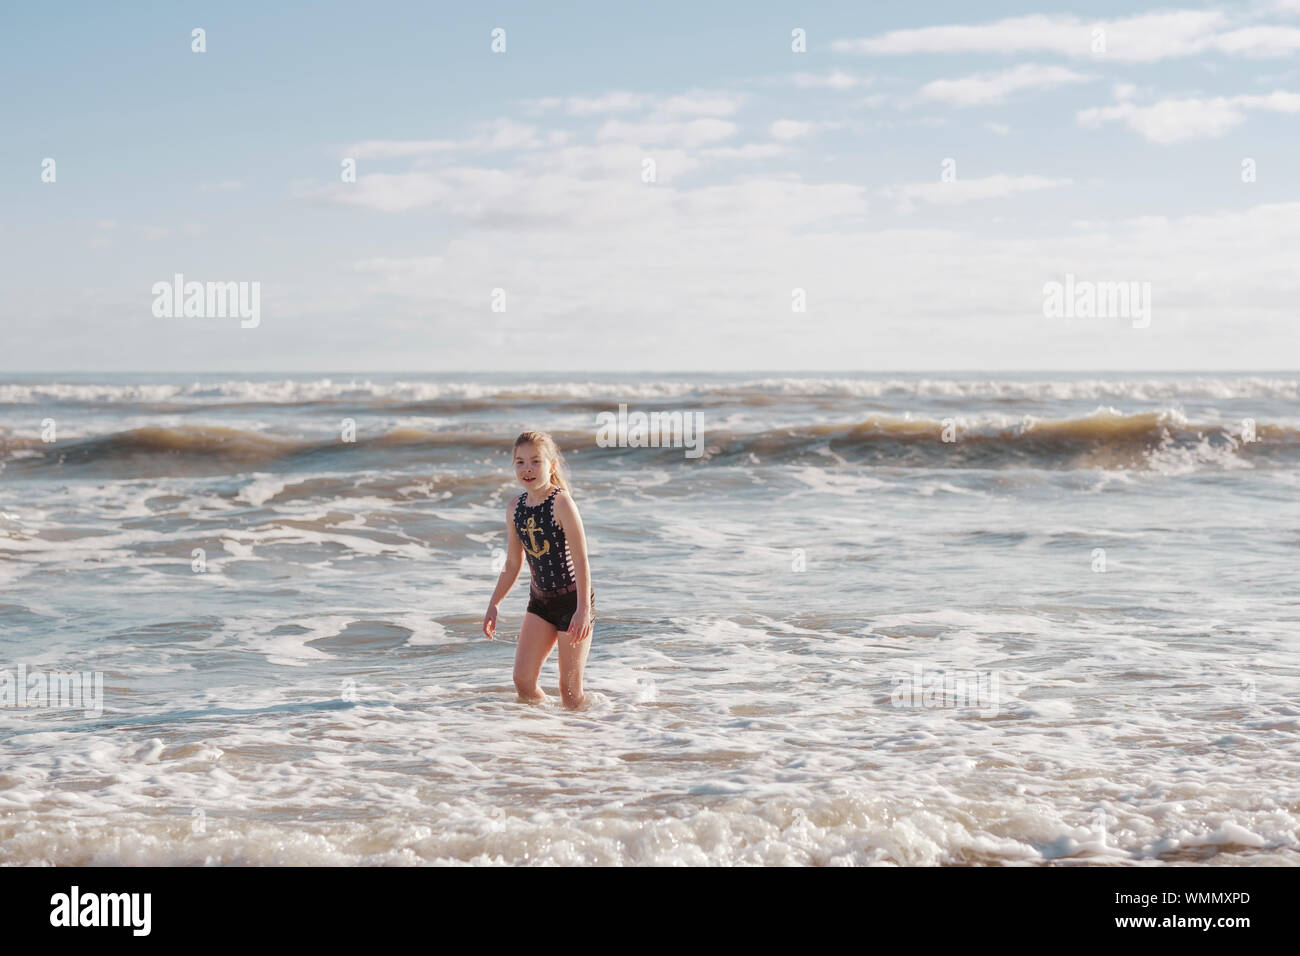 Girl in a swimsuit playing in the surf at the beach Stock Photo